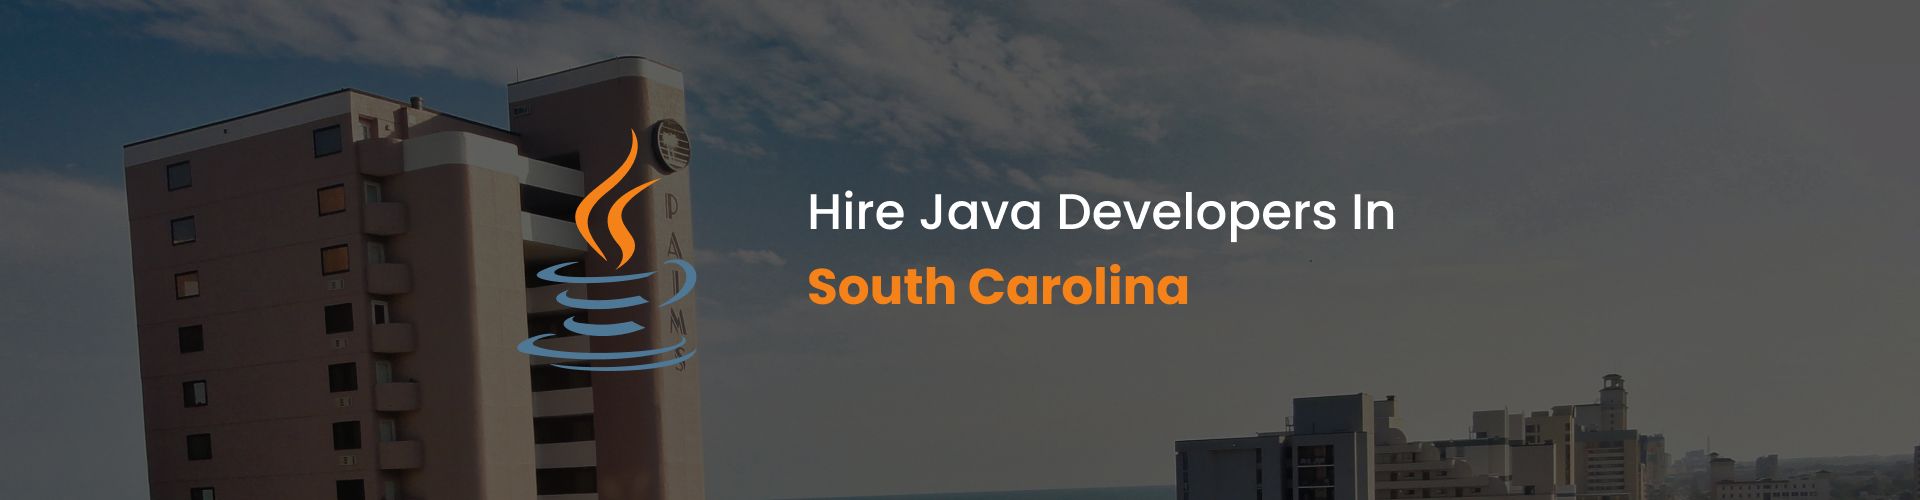 hire java developers in south carolina